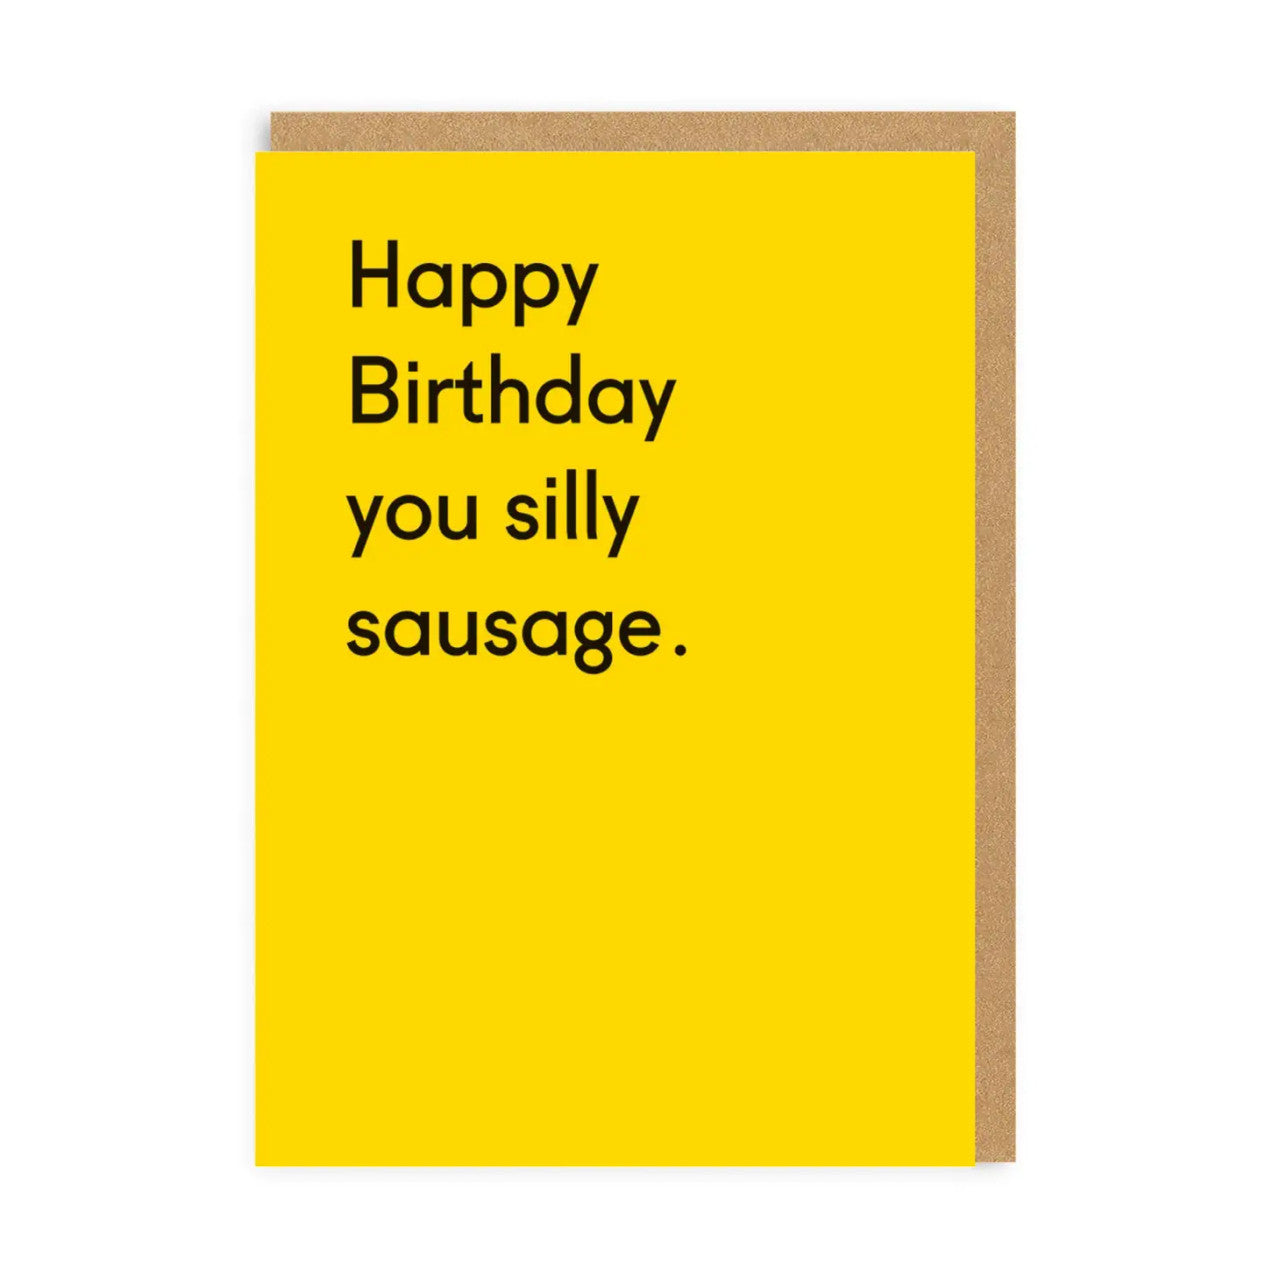 Birthday Cards text reads "Happy Birthday Silly Sausage"